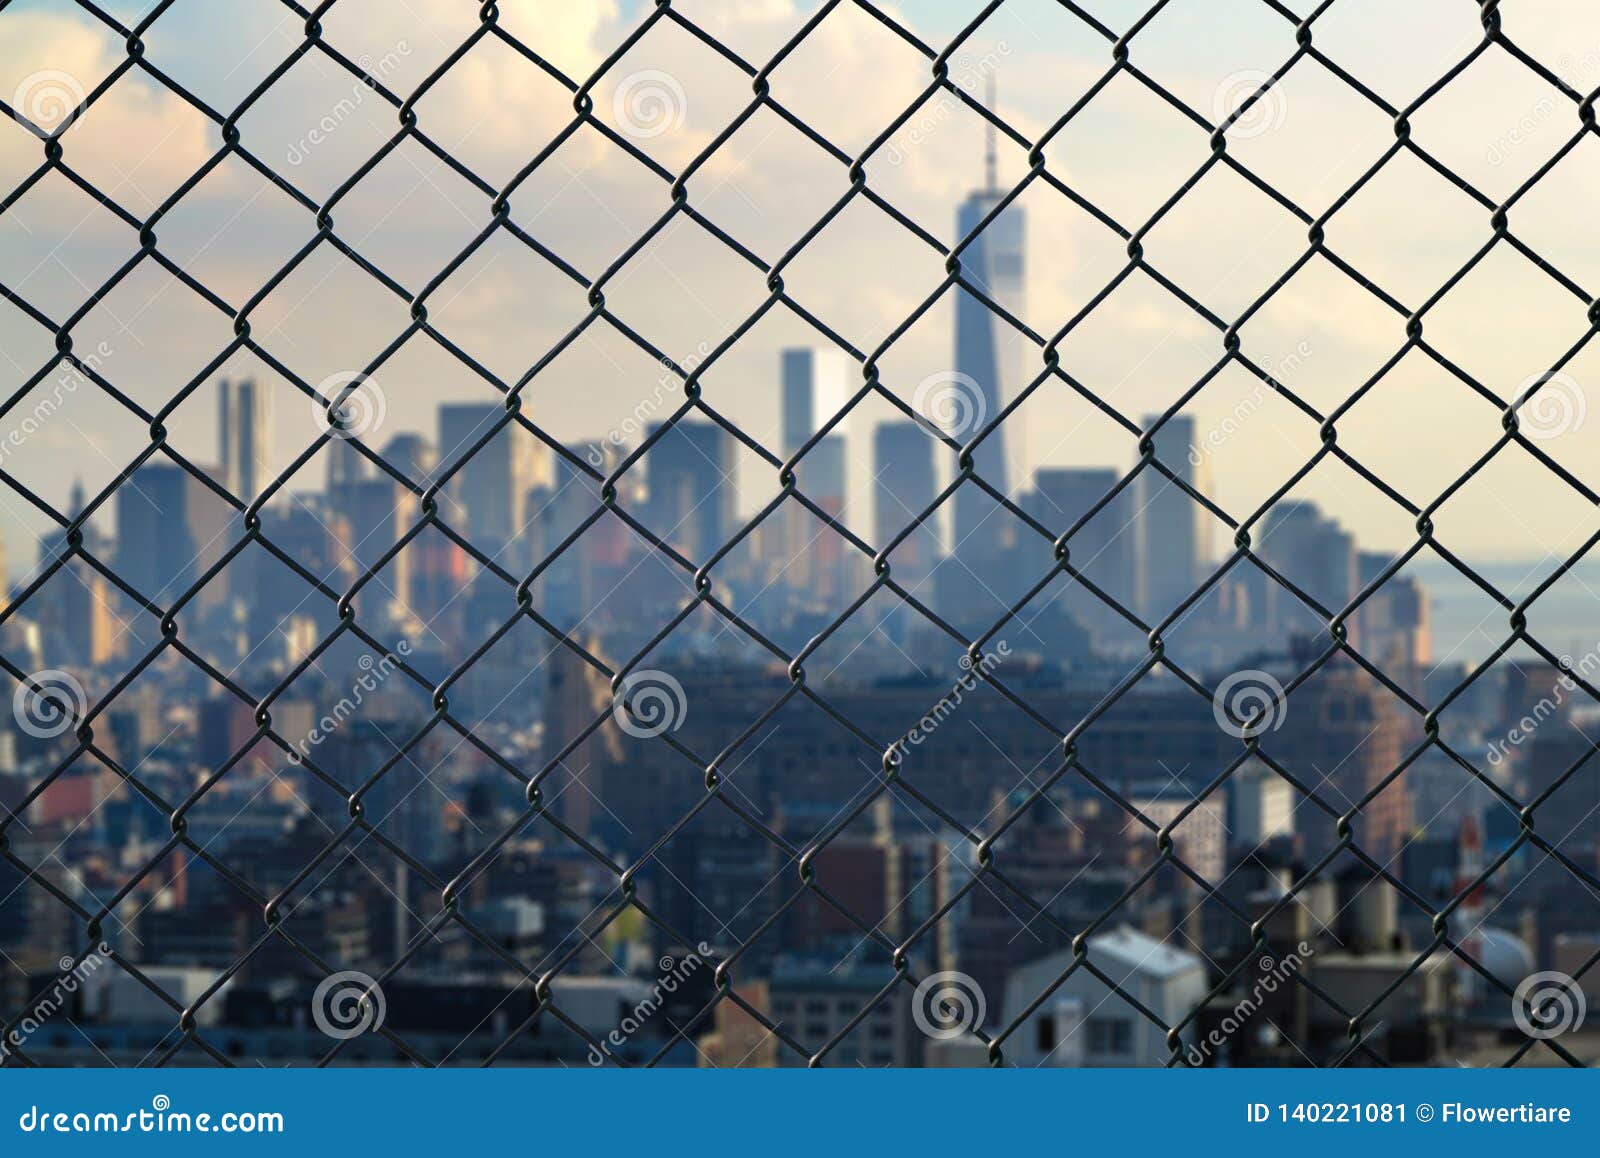 New York City Behind Steel Mesh Wire Fence. Stock Image - Image of ...
